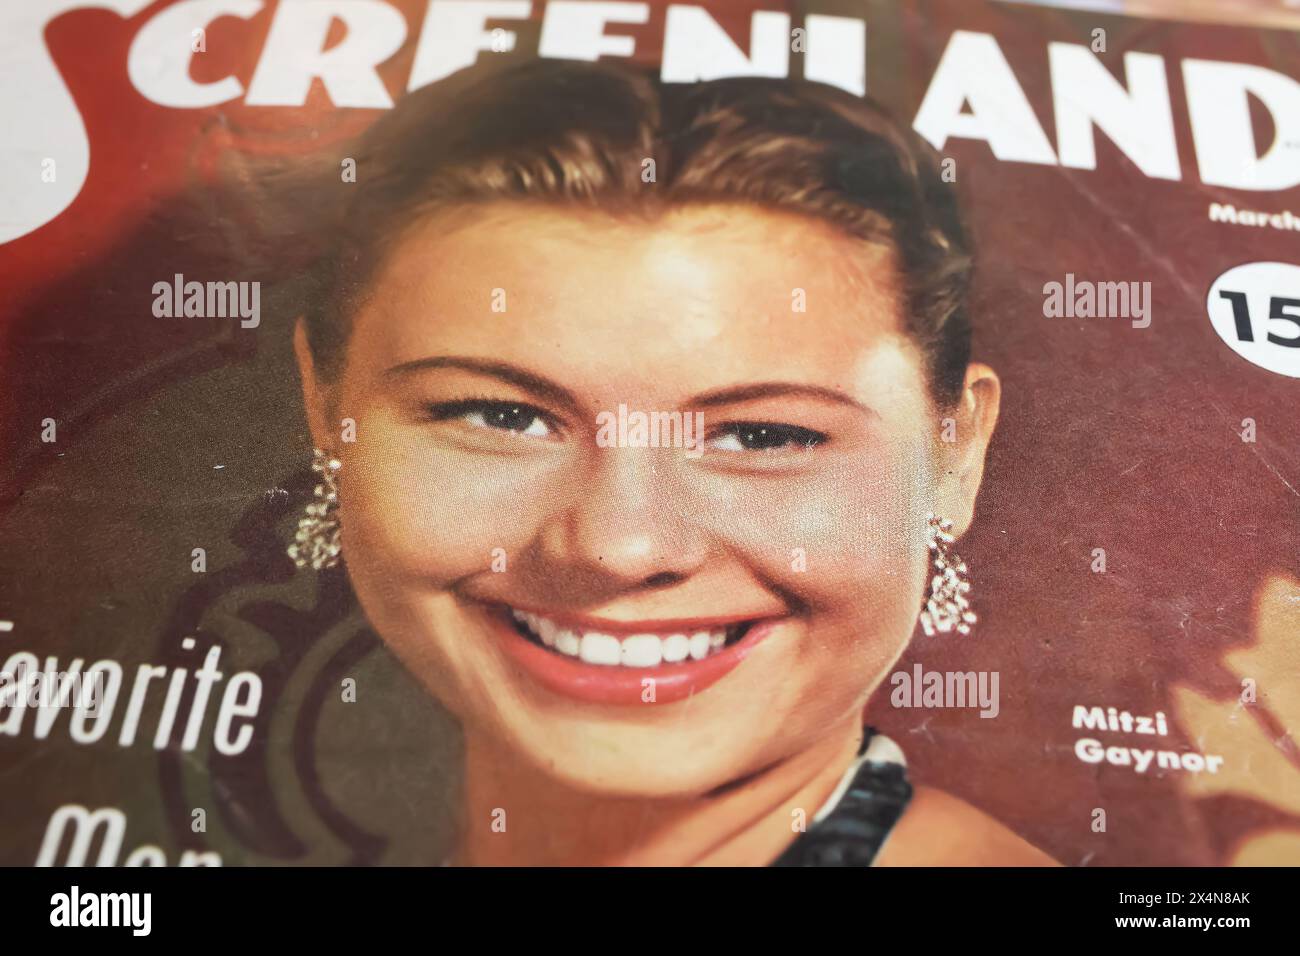 Viersen, Germany - May 1. 2024: Closeup of vintage Screenland movie magazine cover with portrait of actress and singer Mitzi Gaynor 1952 Stock Photo